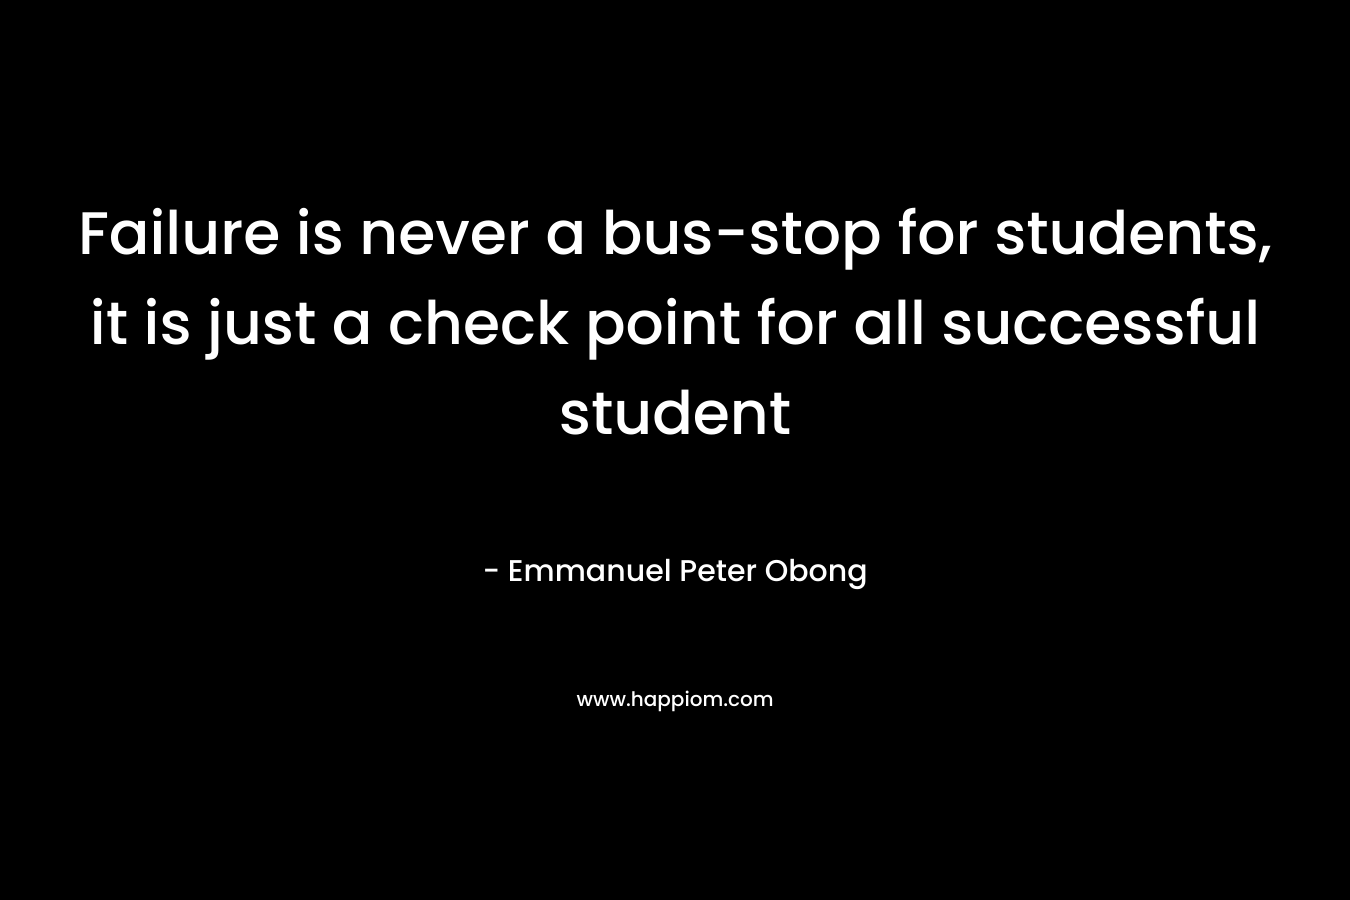 Failure is never a bus-stop for students, it is just a check point for all successful student